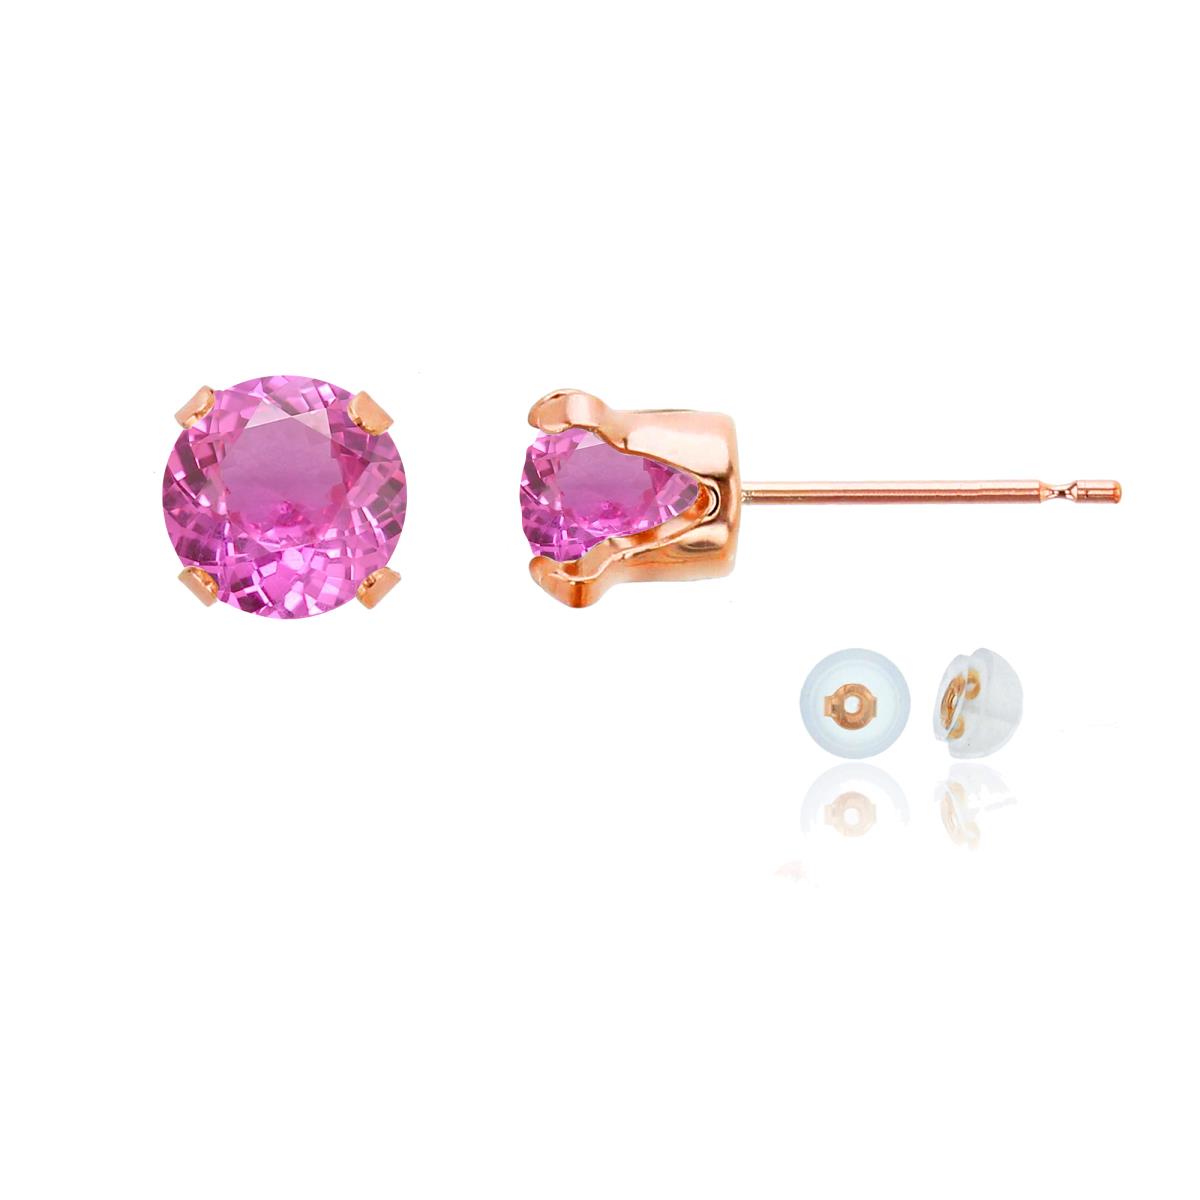 10K Rose Gold 6mm Round Cr Pink Sapphire Stud Earring with Silicone Back